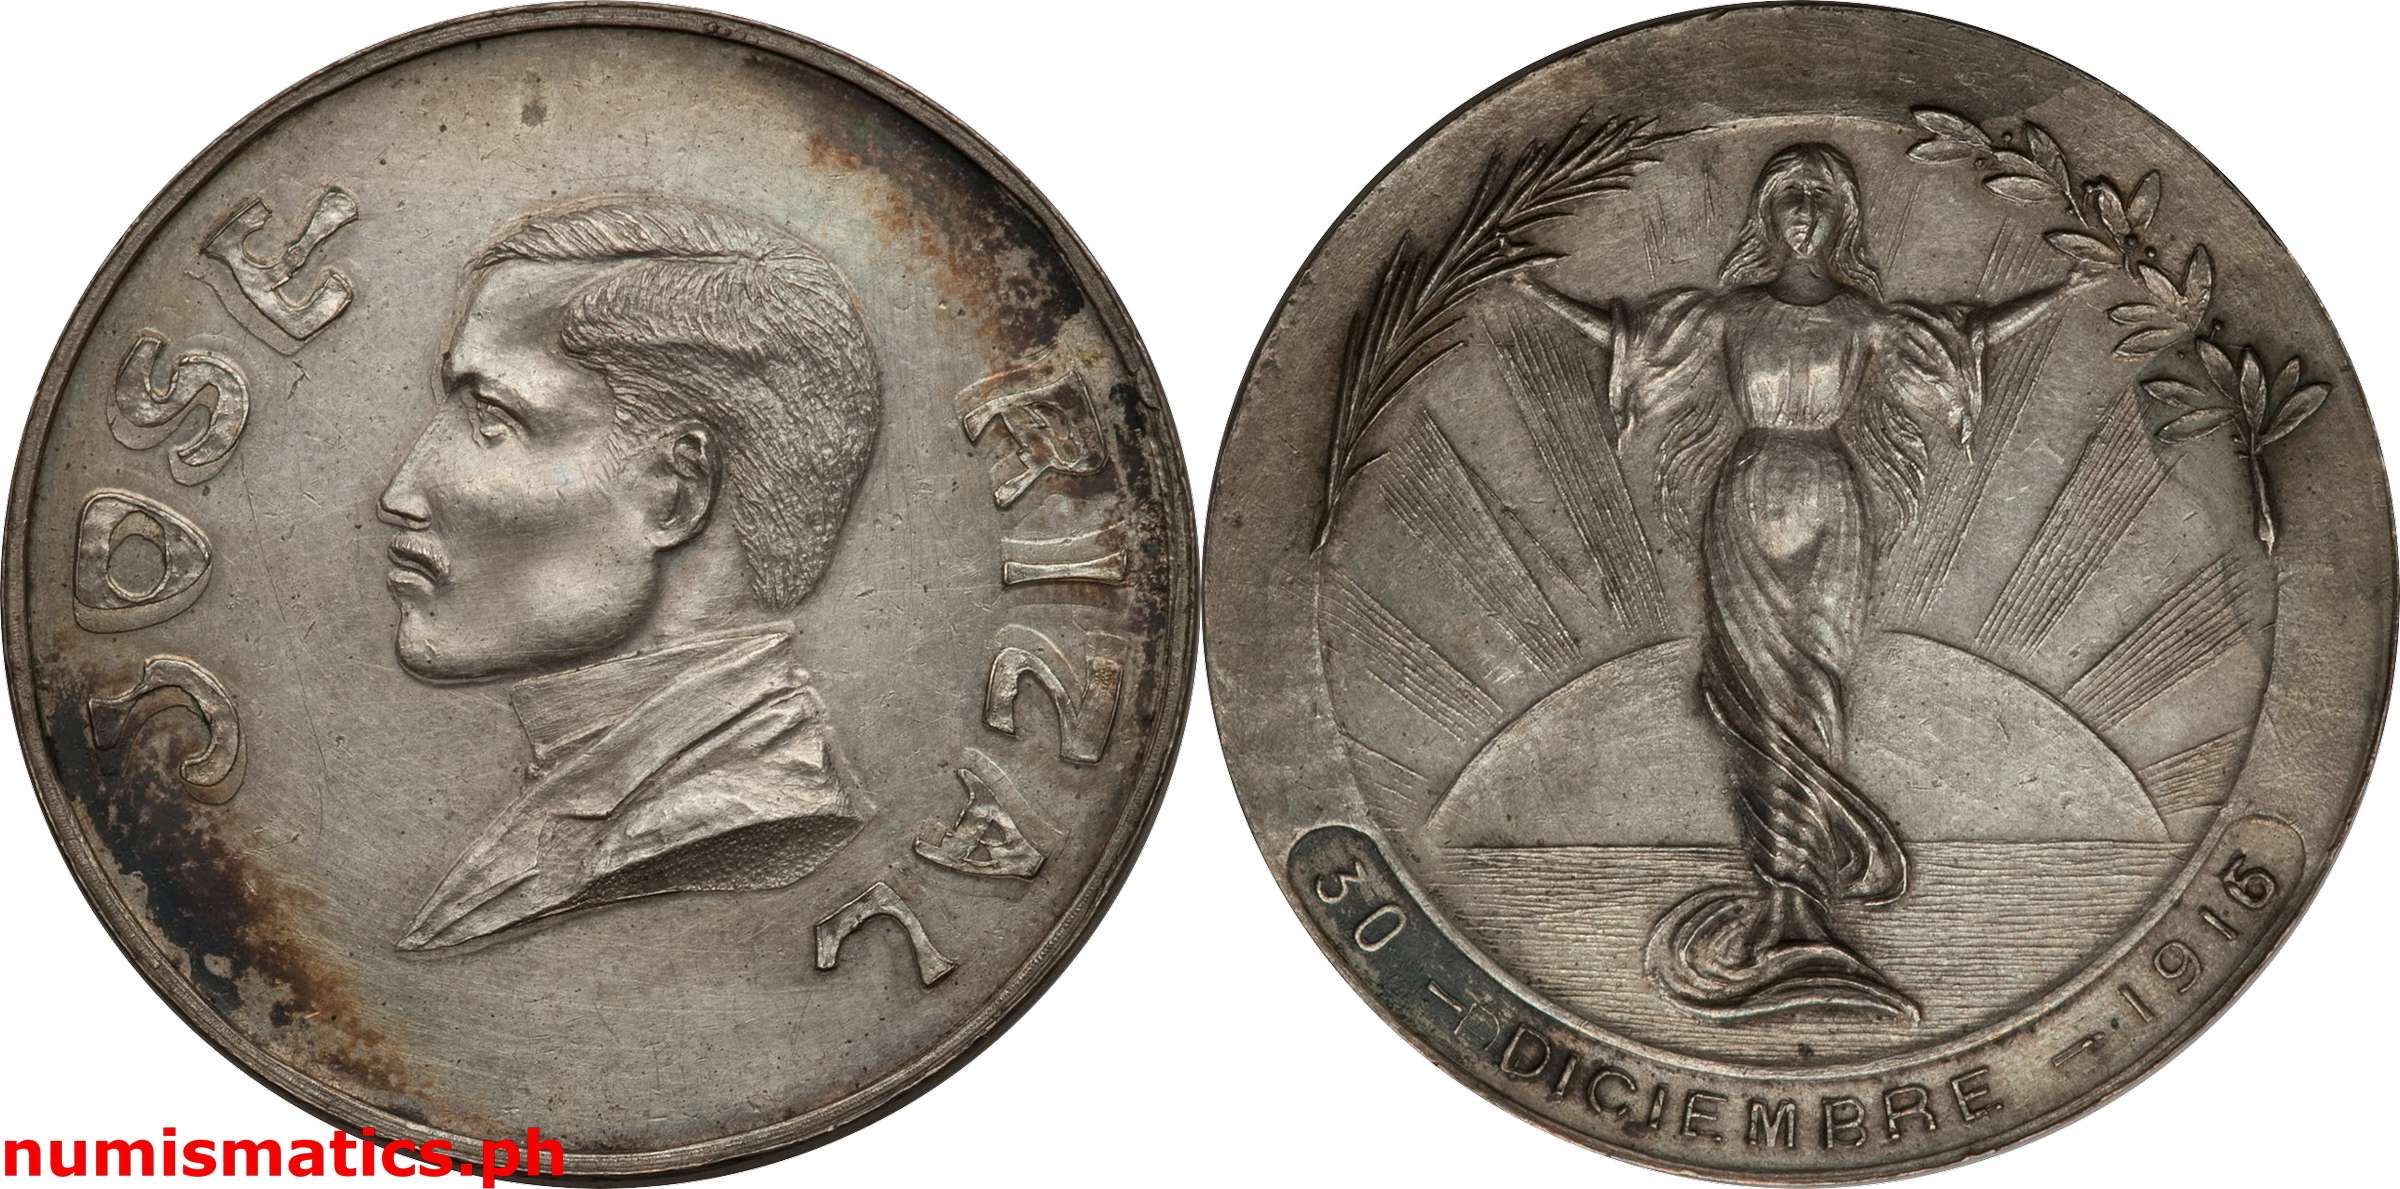 1915 Jose Rizal Medal 1916 Issue